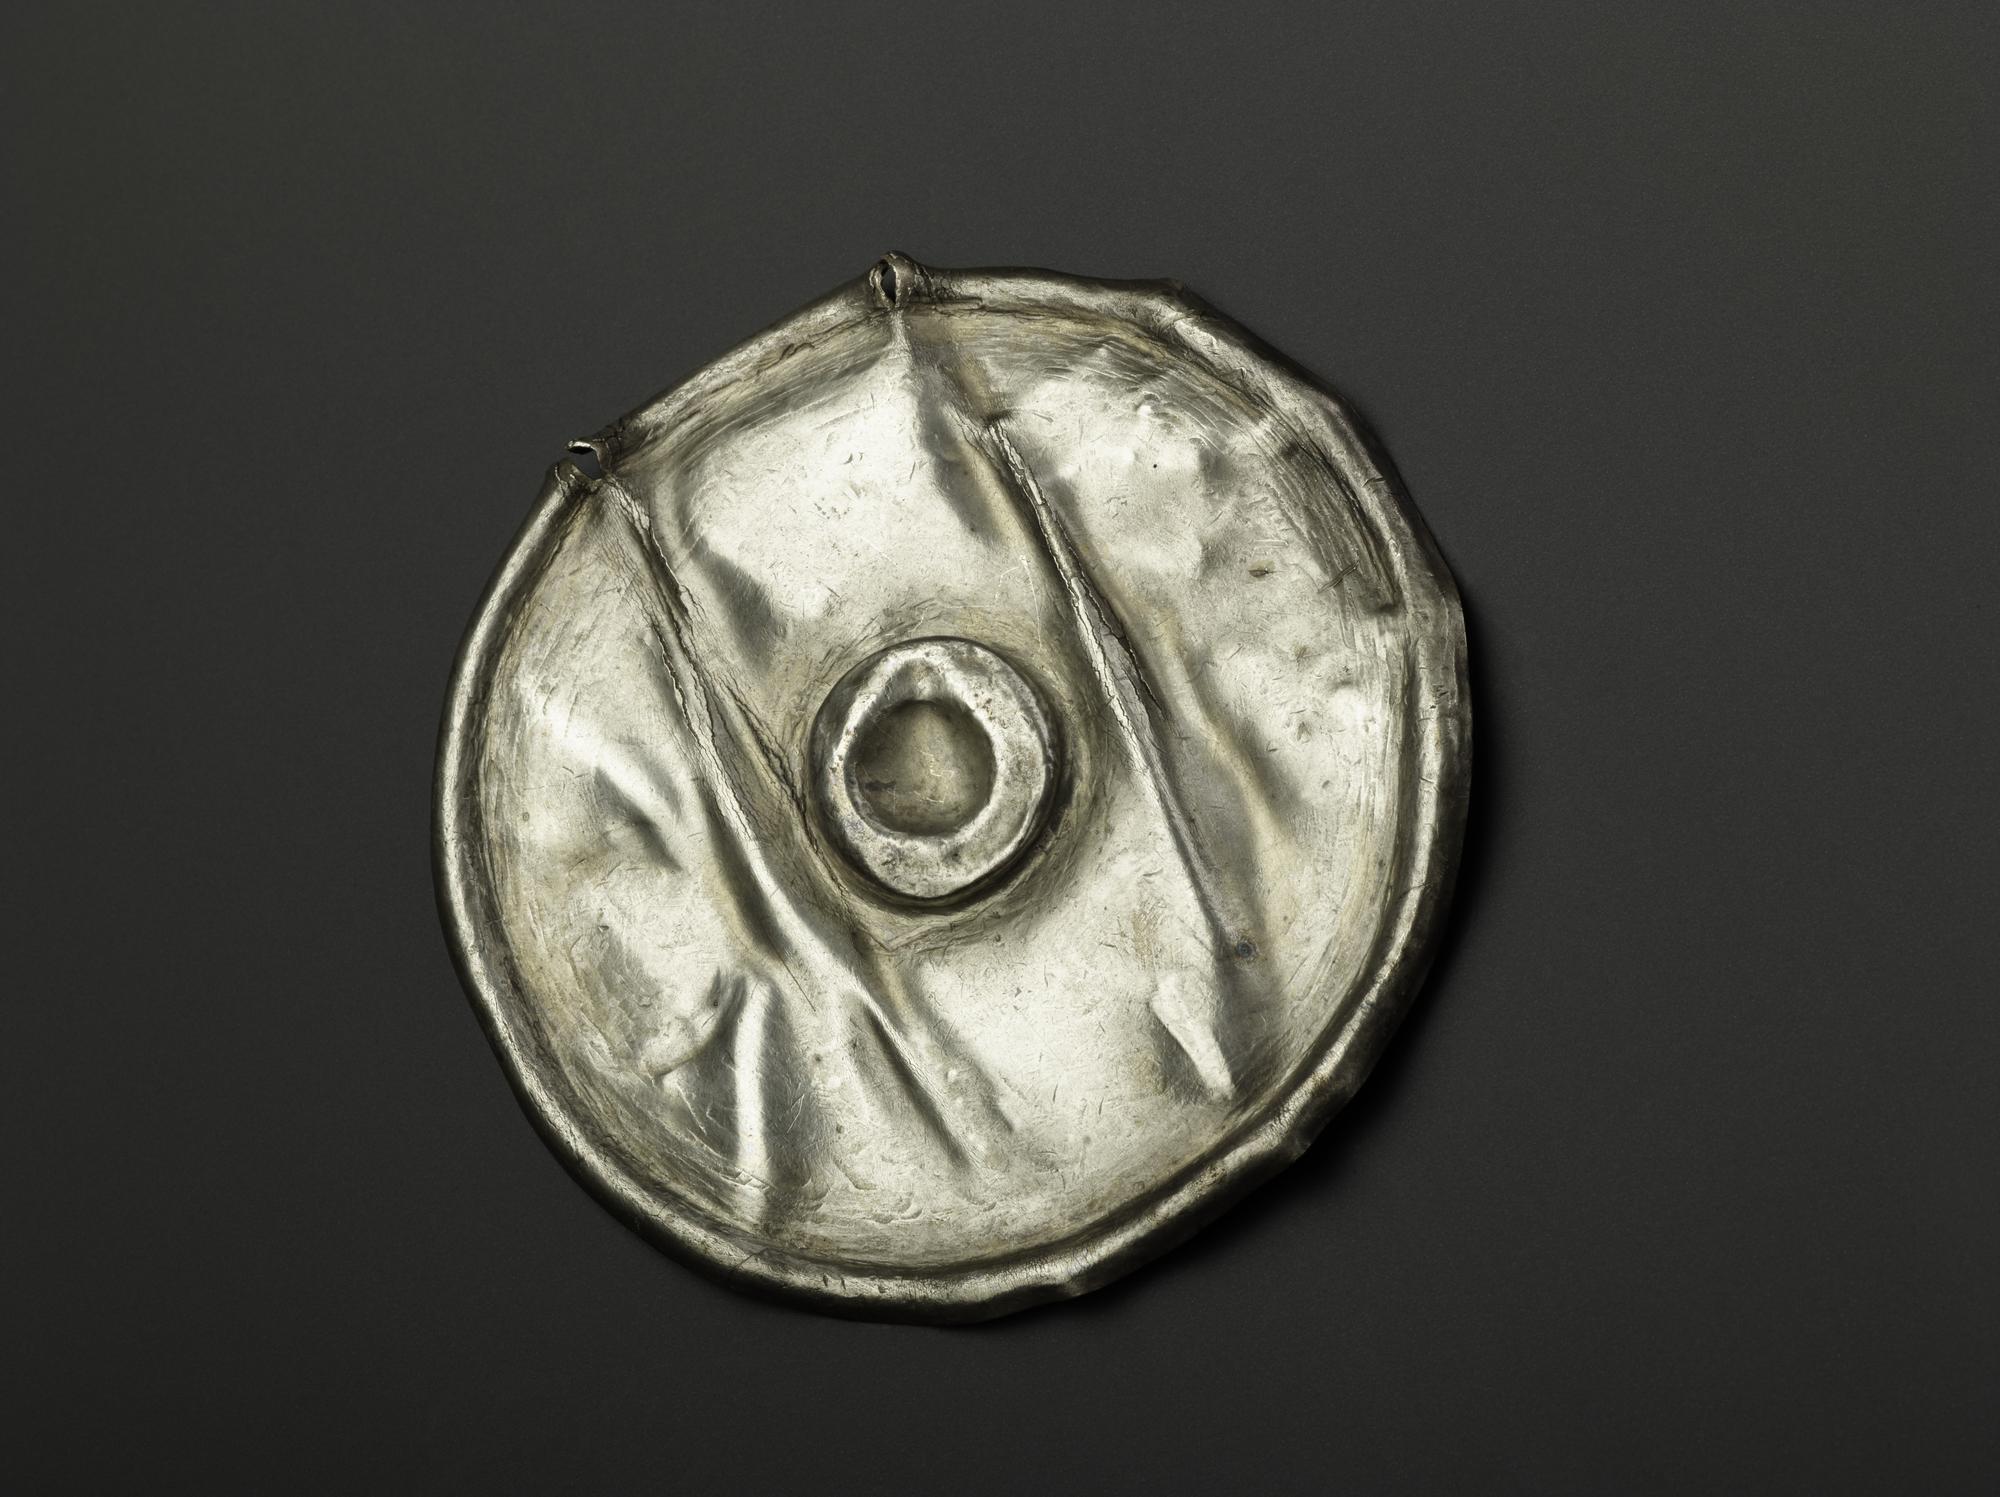 Image of Complete silver circular object with central repoussé boss and raised curved rim, from Norrie